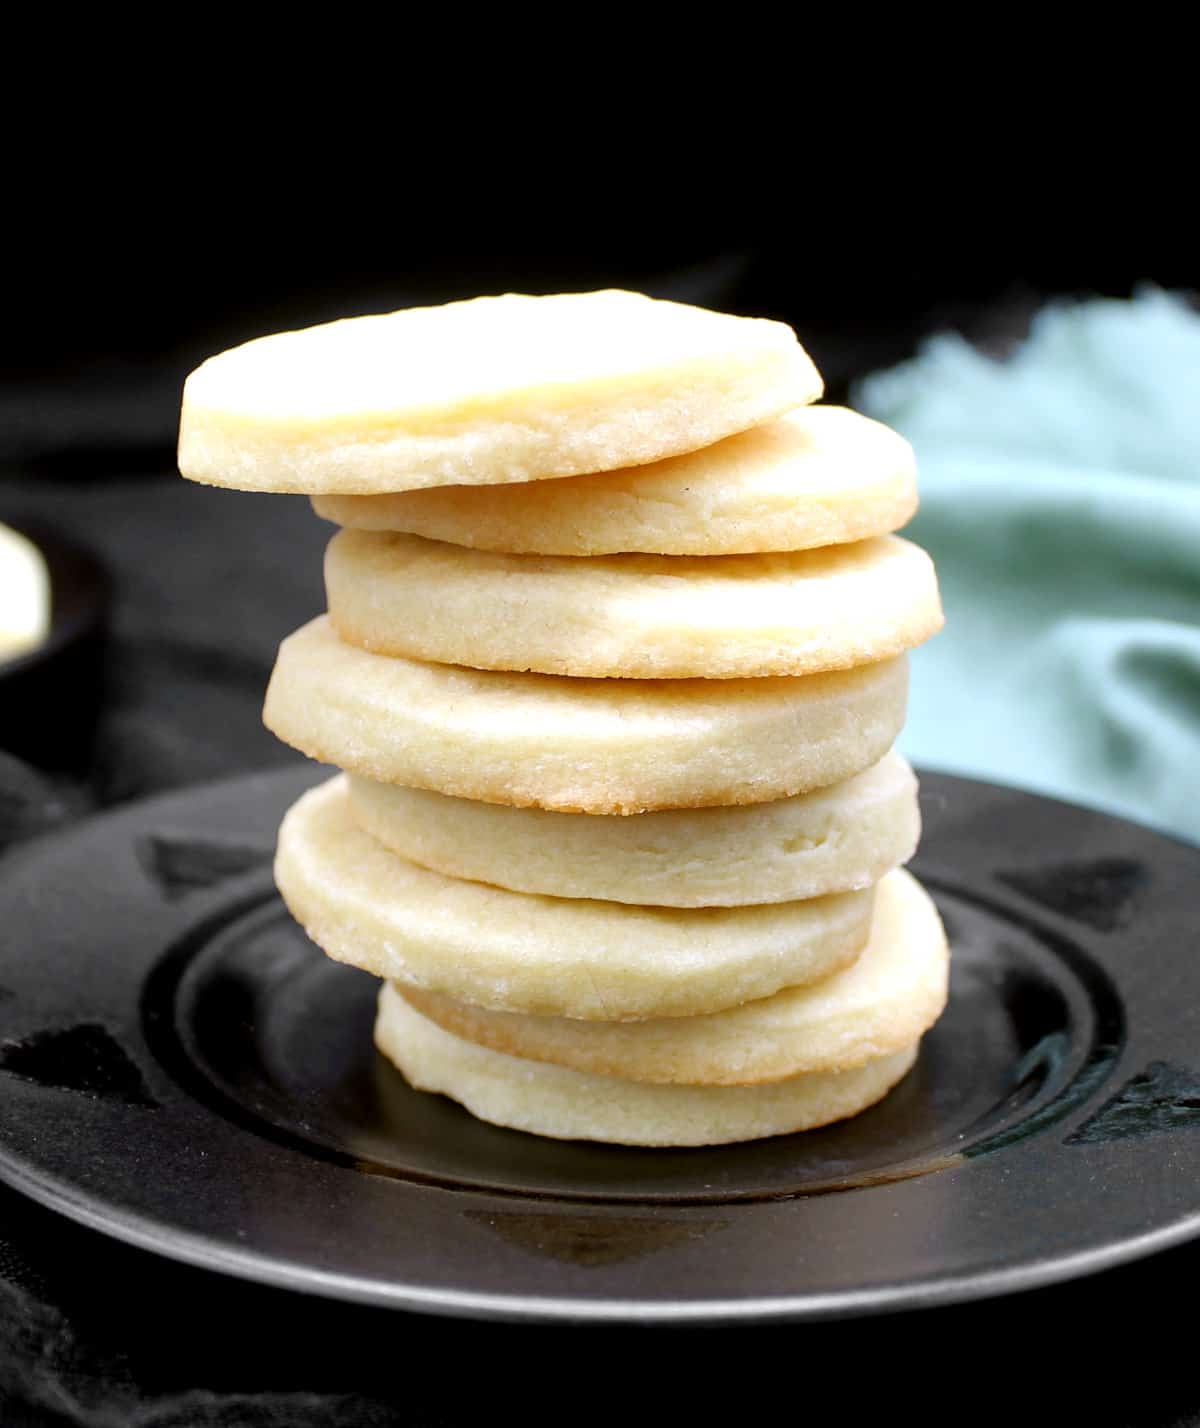 Round sugar cookies stacked on a black plate with a green napkin.